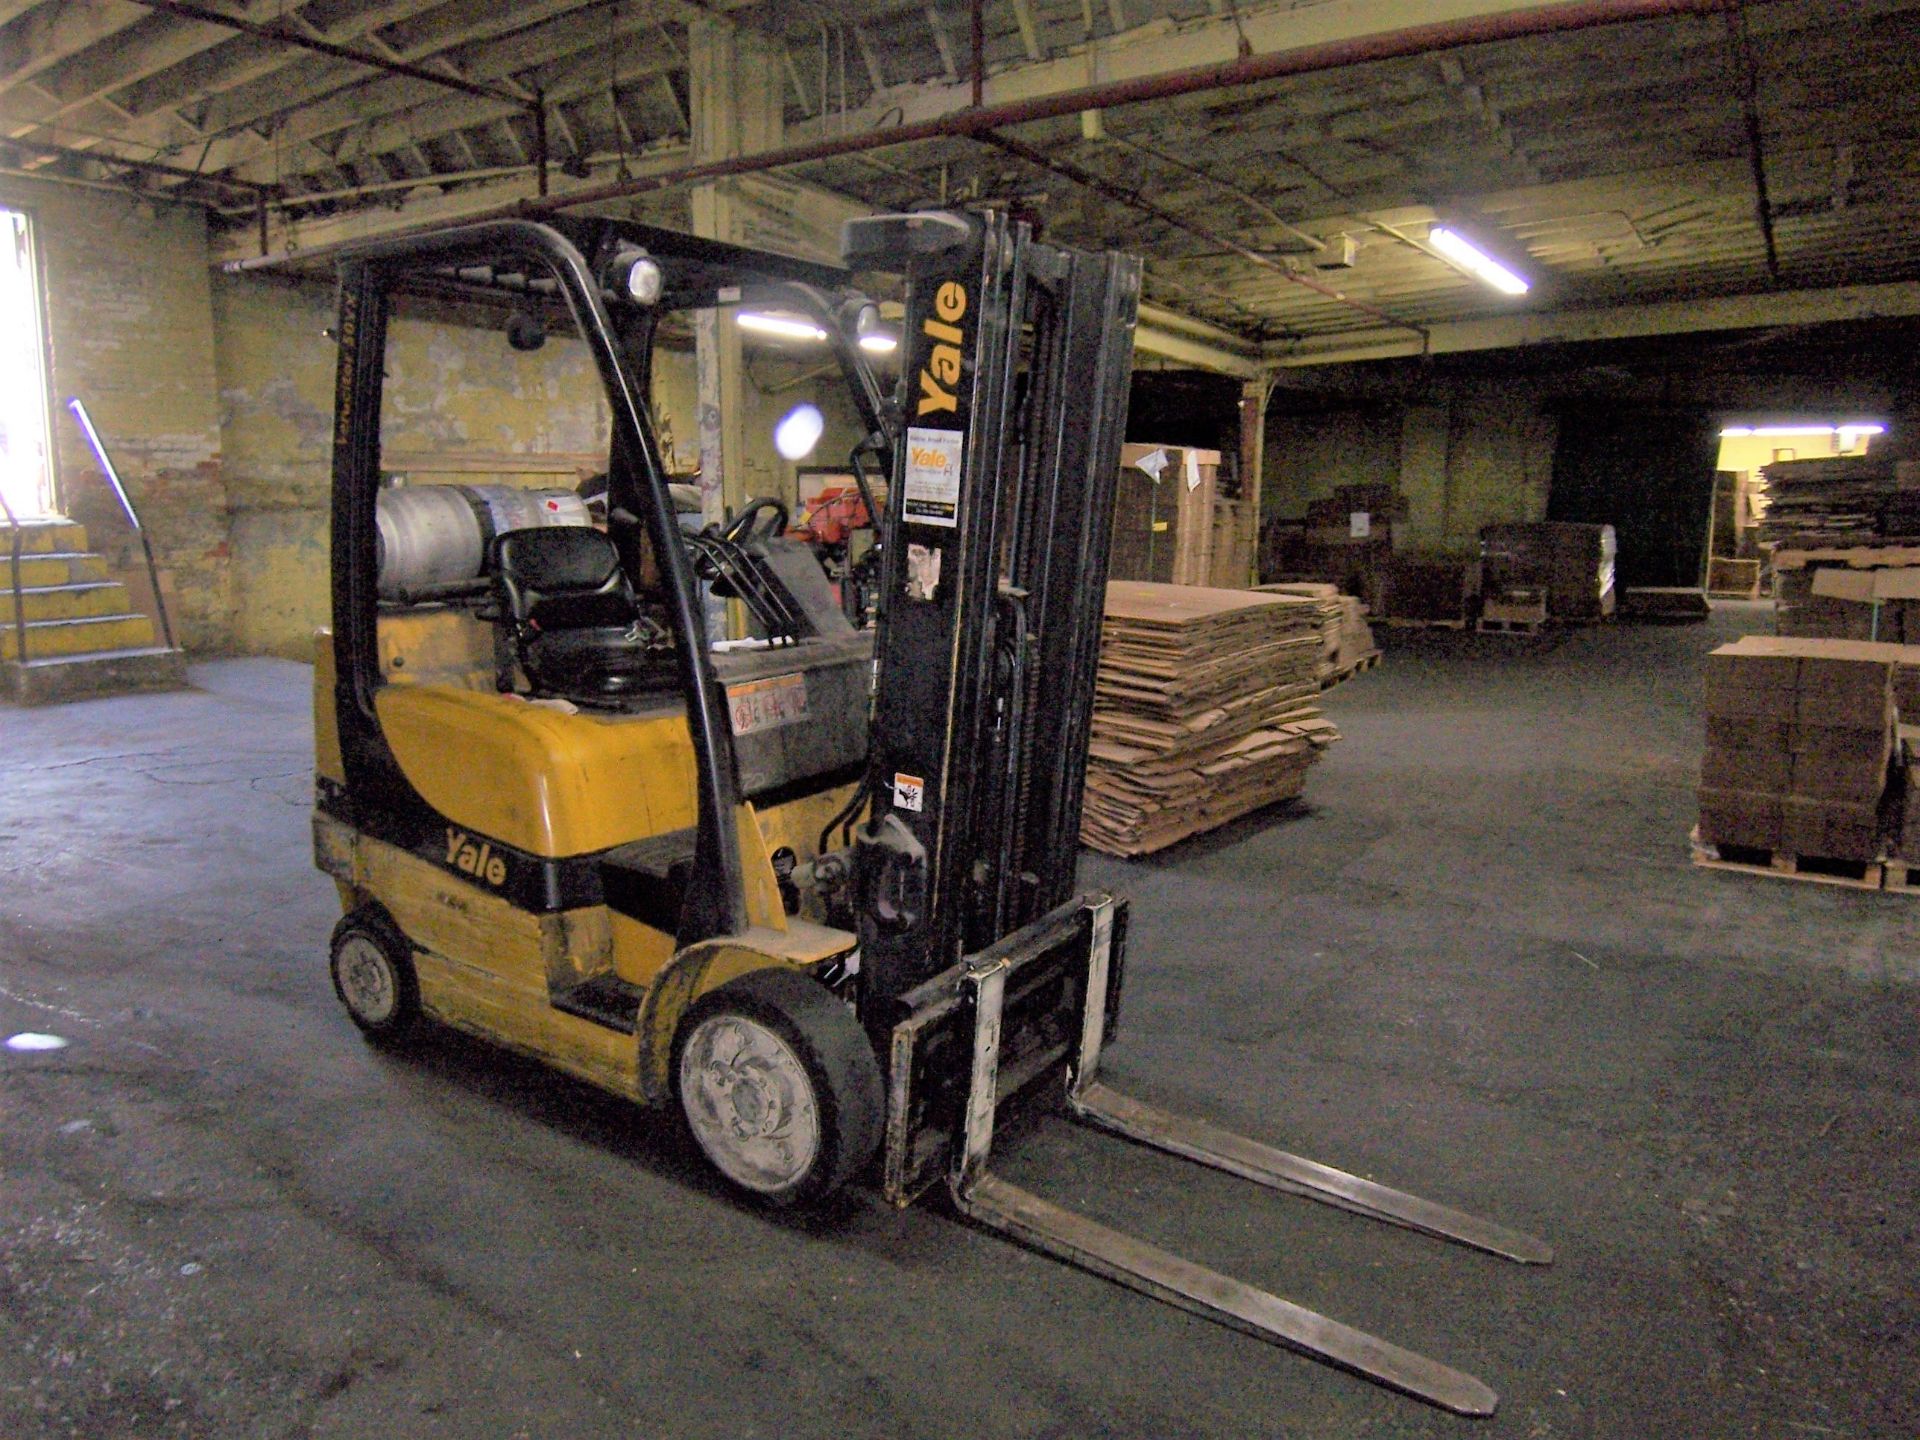 4350# CAPACITY YALE VELOCITOR 50VX MDL. GLC650VXNSE083 PROPANE POWERED FORKLIFT, HARD TIRES, SIDE - Image 2 of 2